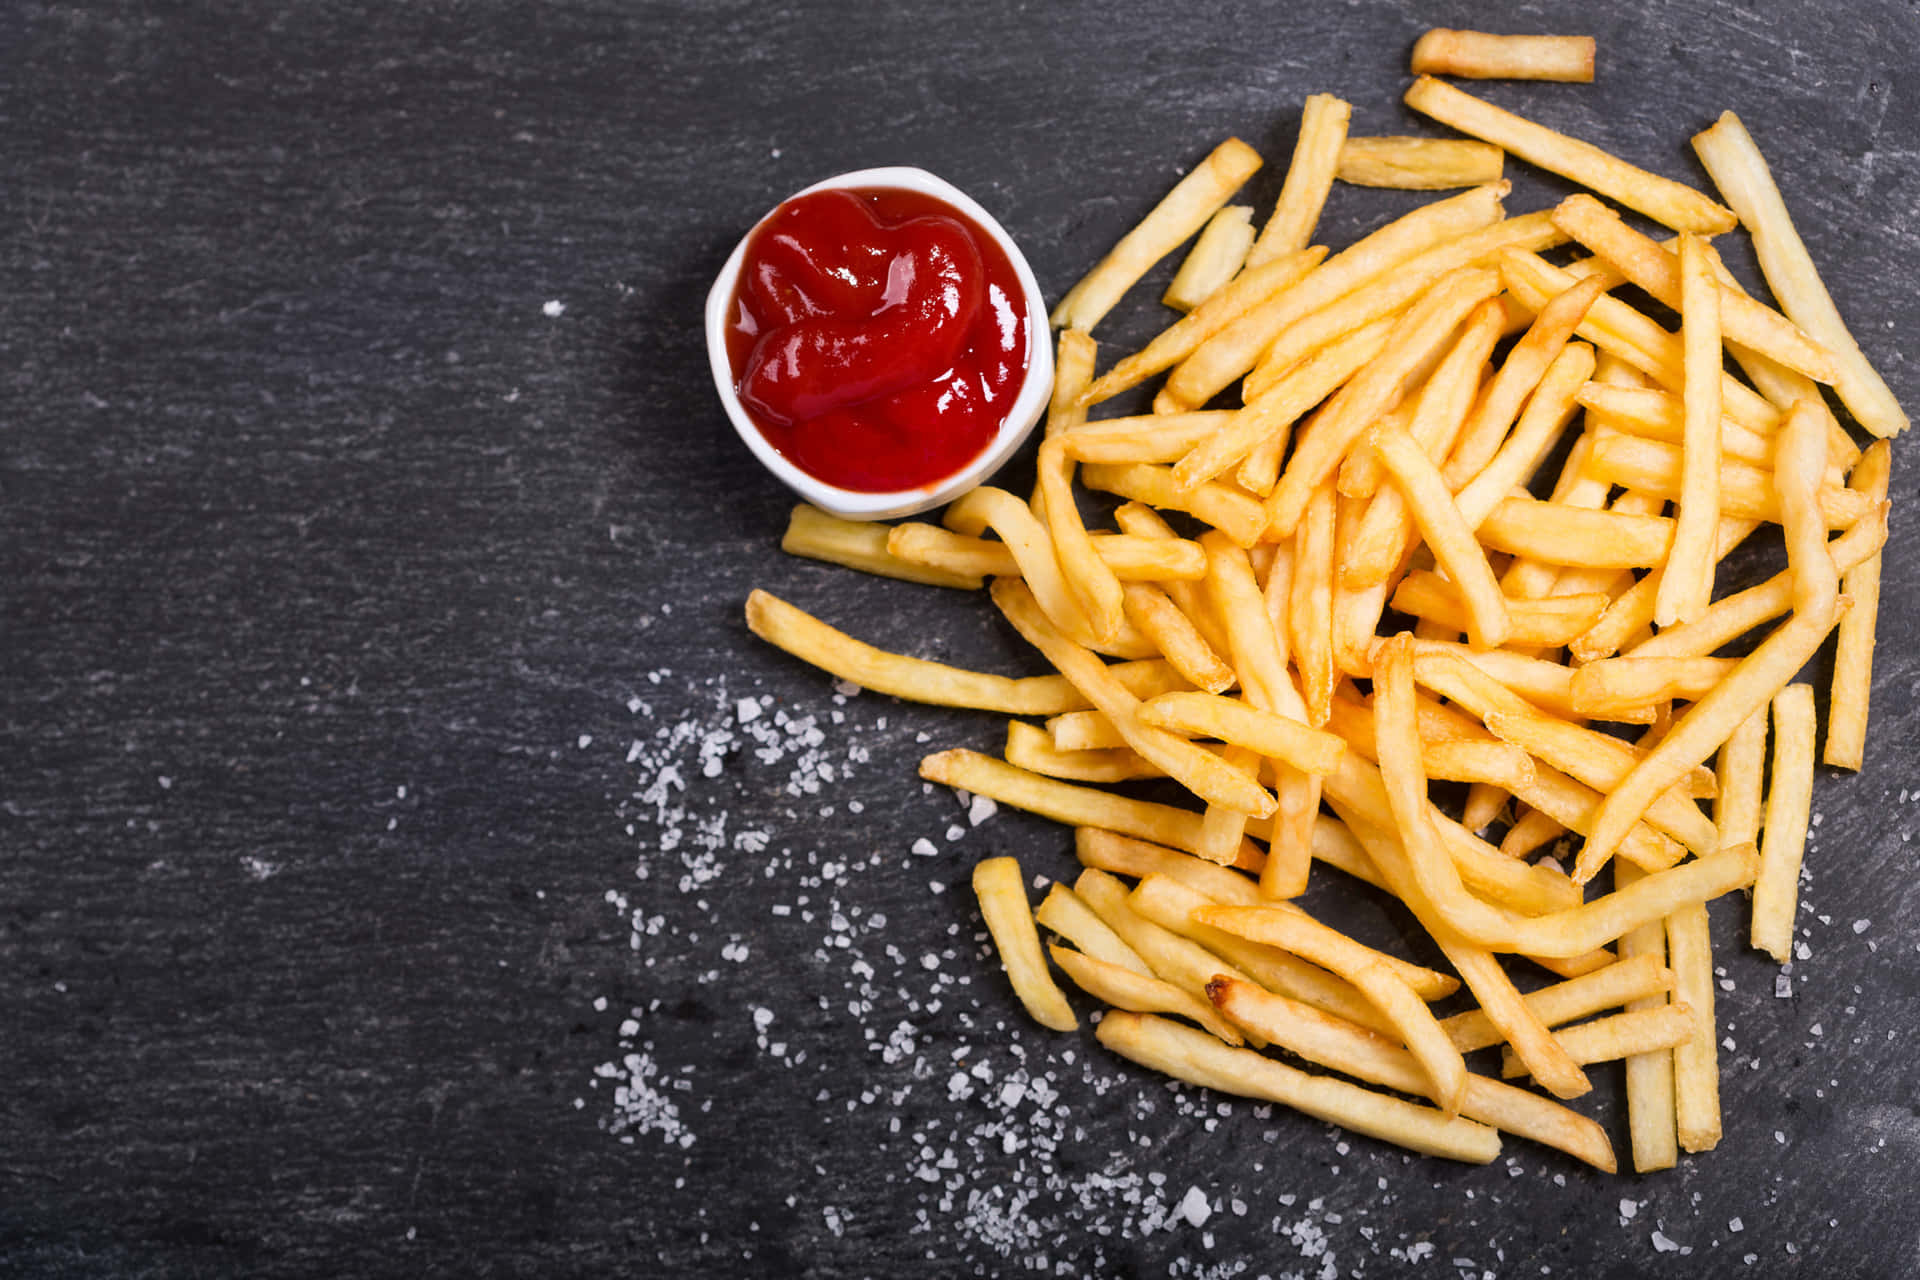 Enjoy the simple pleasure of golden-fried French Fries.